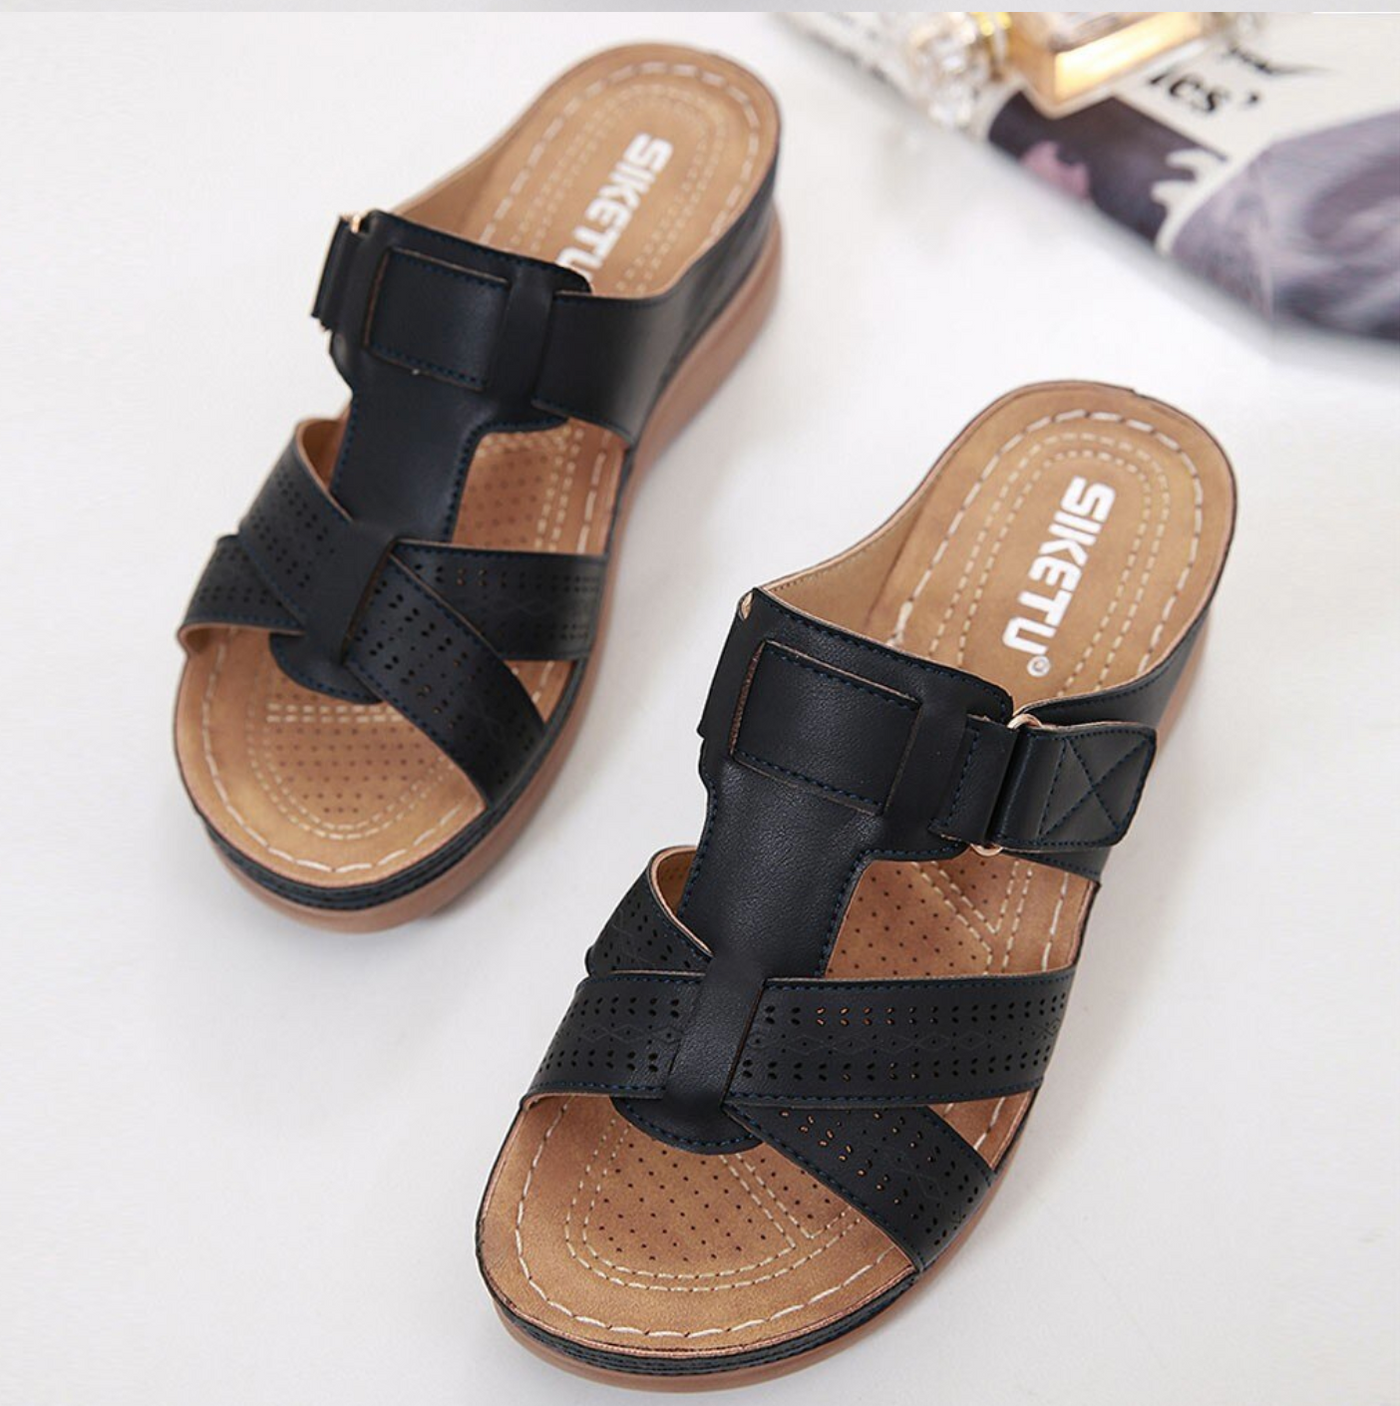 EASYWALK - Comfortable orthopedic sandals with extra soft sole for less foot pain and better body balance